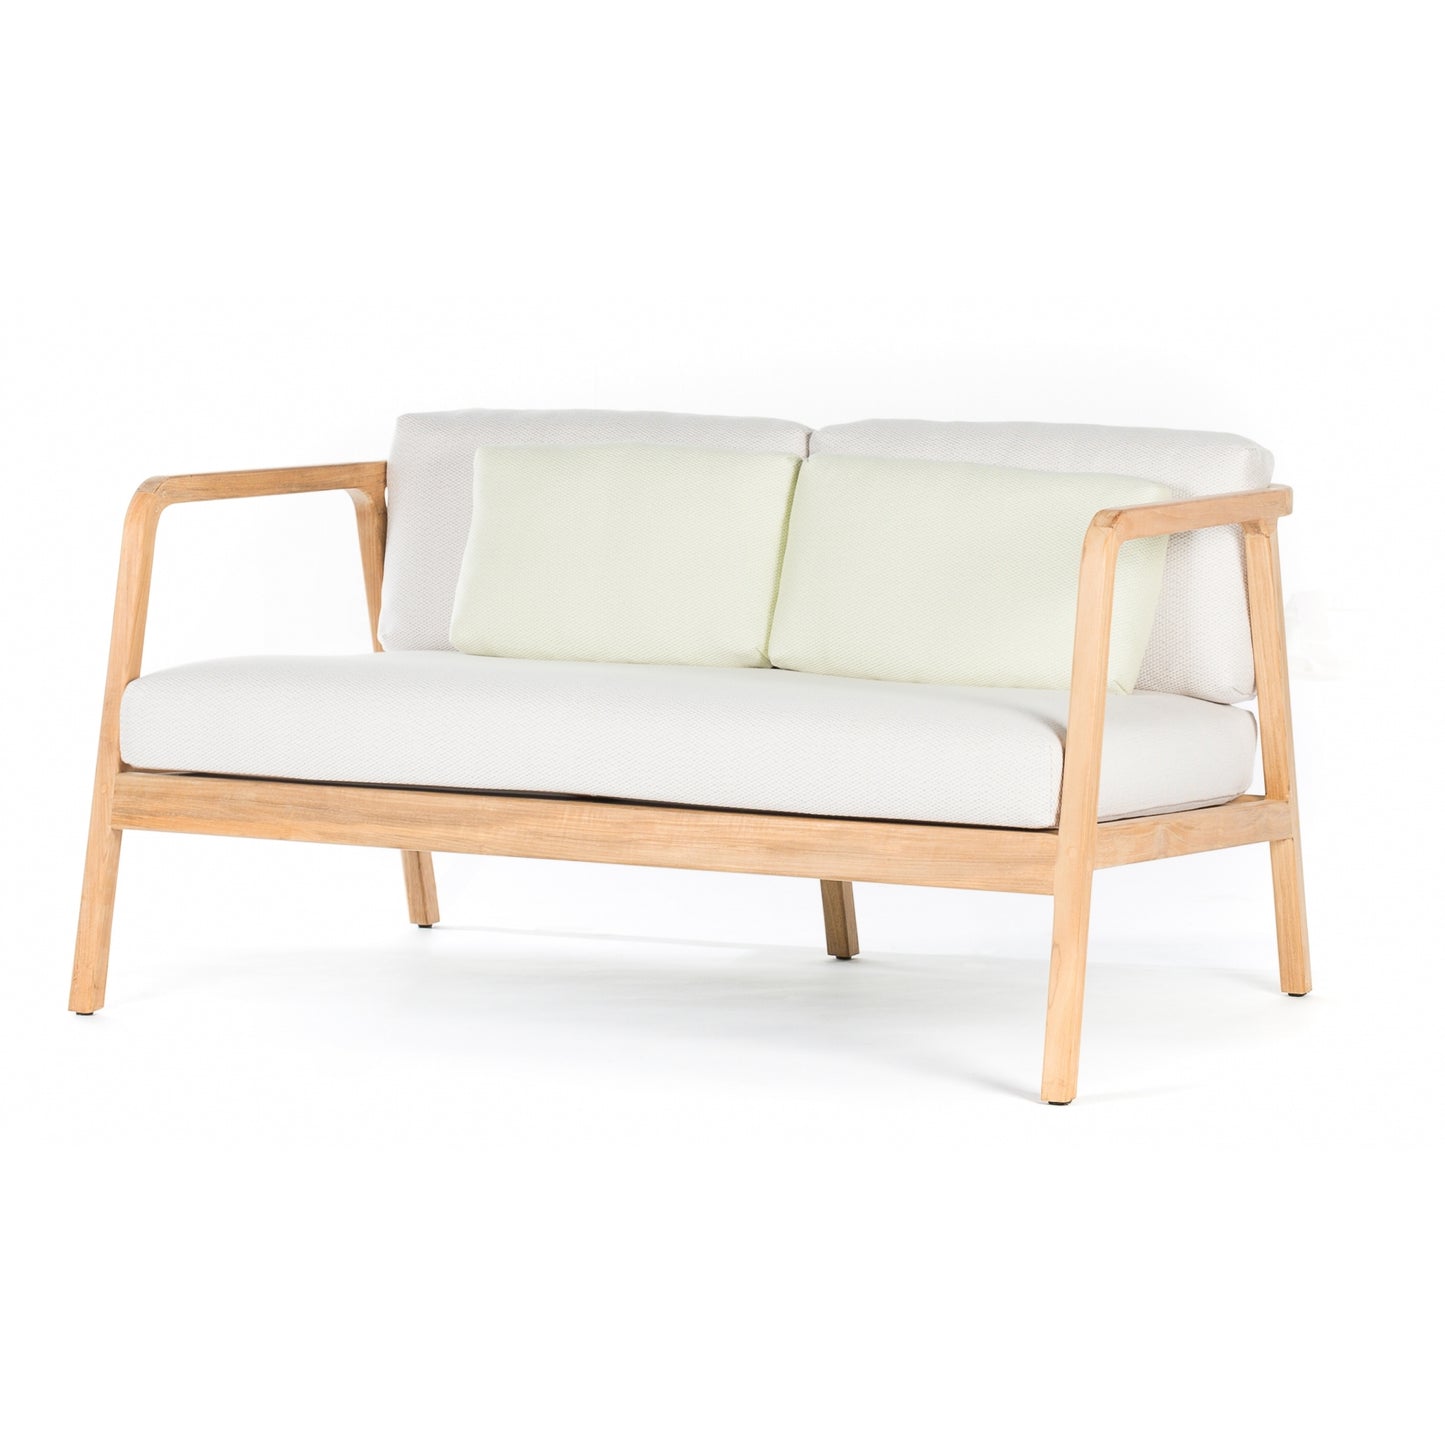 Flexx Love Seat - PadioLiving - Flexx Love Seat - Outdoor Love Seat - Natural Teak Strapping Coal Weave- Lopi Snow (£3179) - PadioLiving